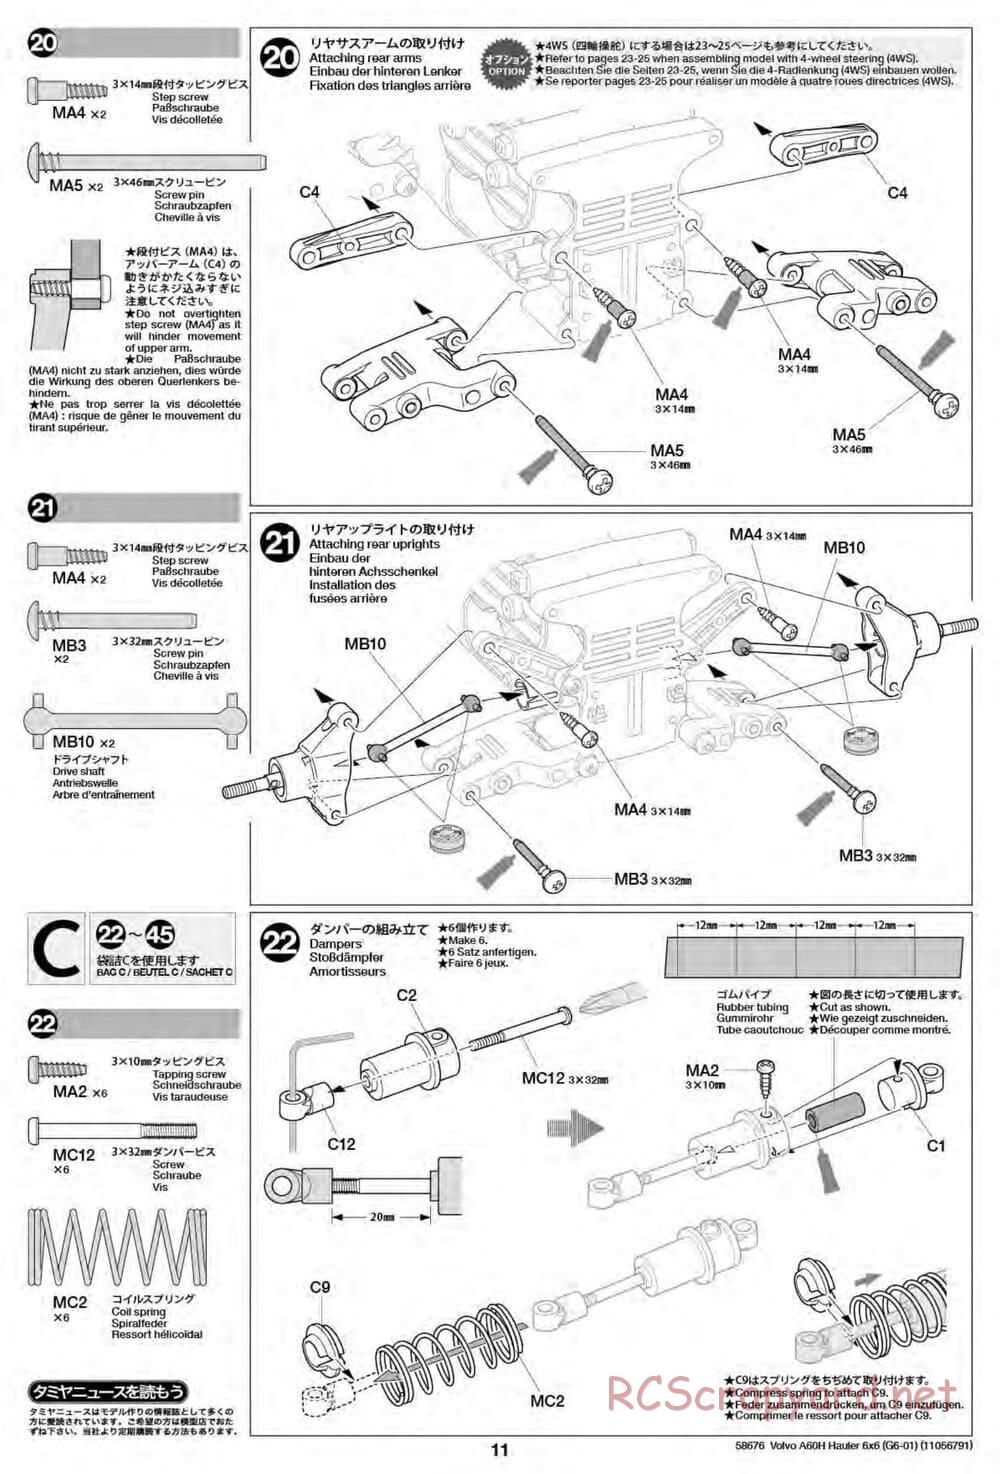 Tamiya - Volvo A60H Dump Truck 6x6 - G6-01 Chassis - Manual - Page 10